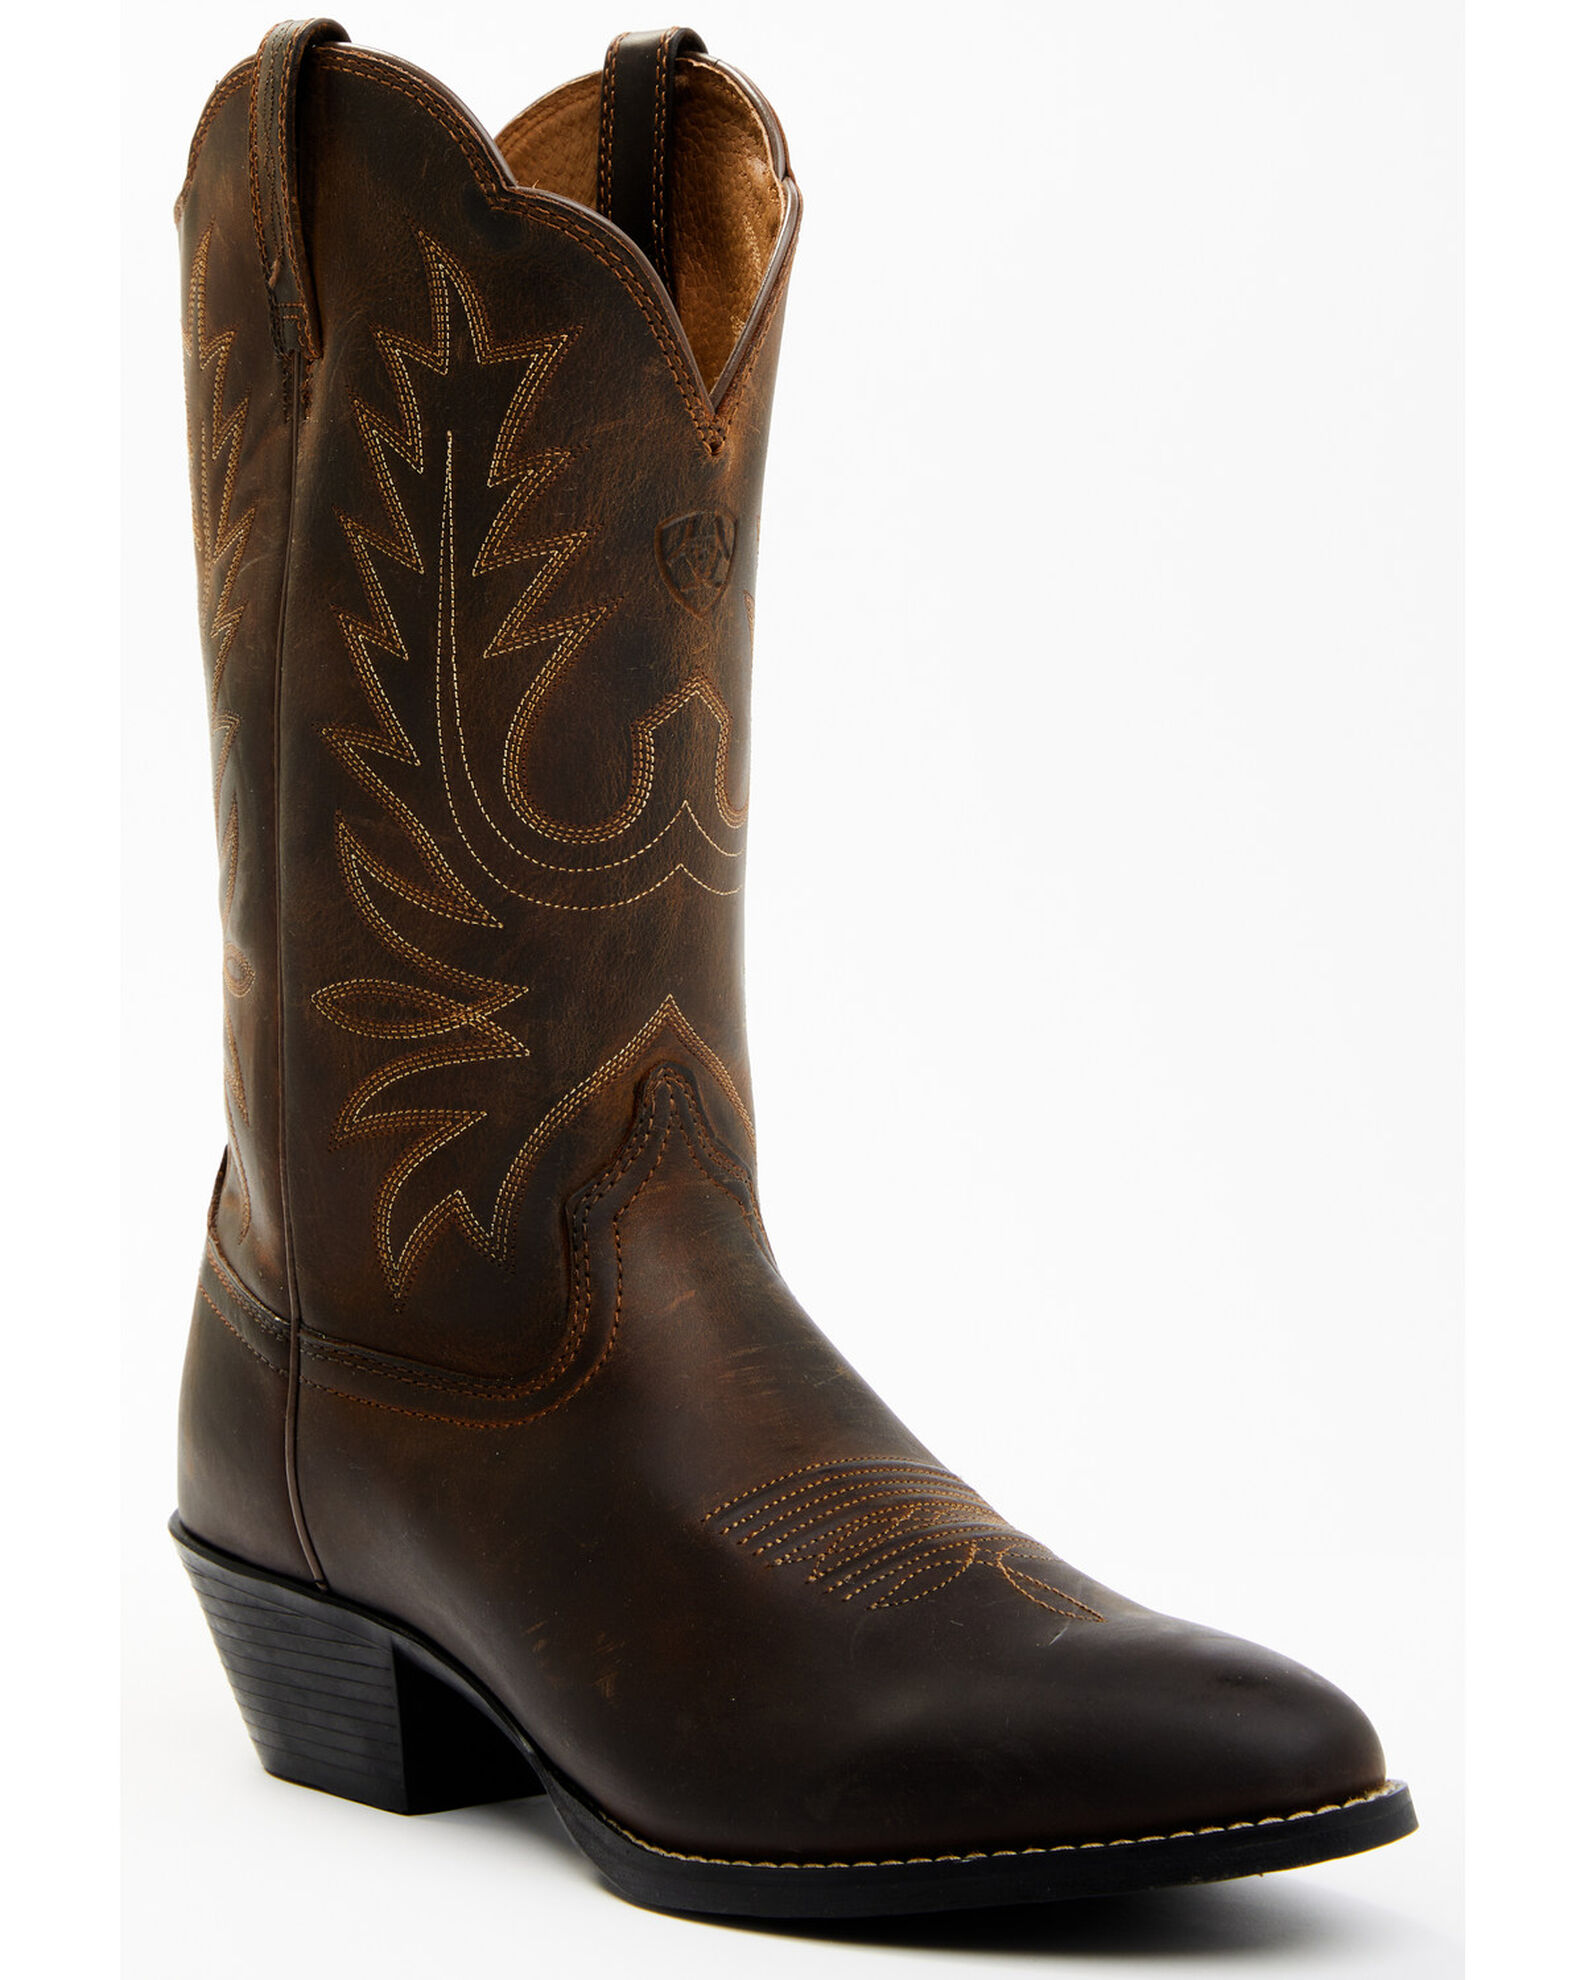 Product Name: Ariat Women's Heritage Western Boots - Round Toe